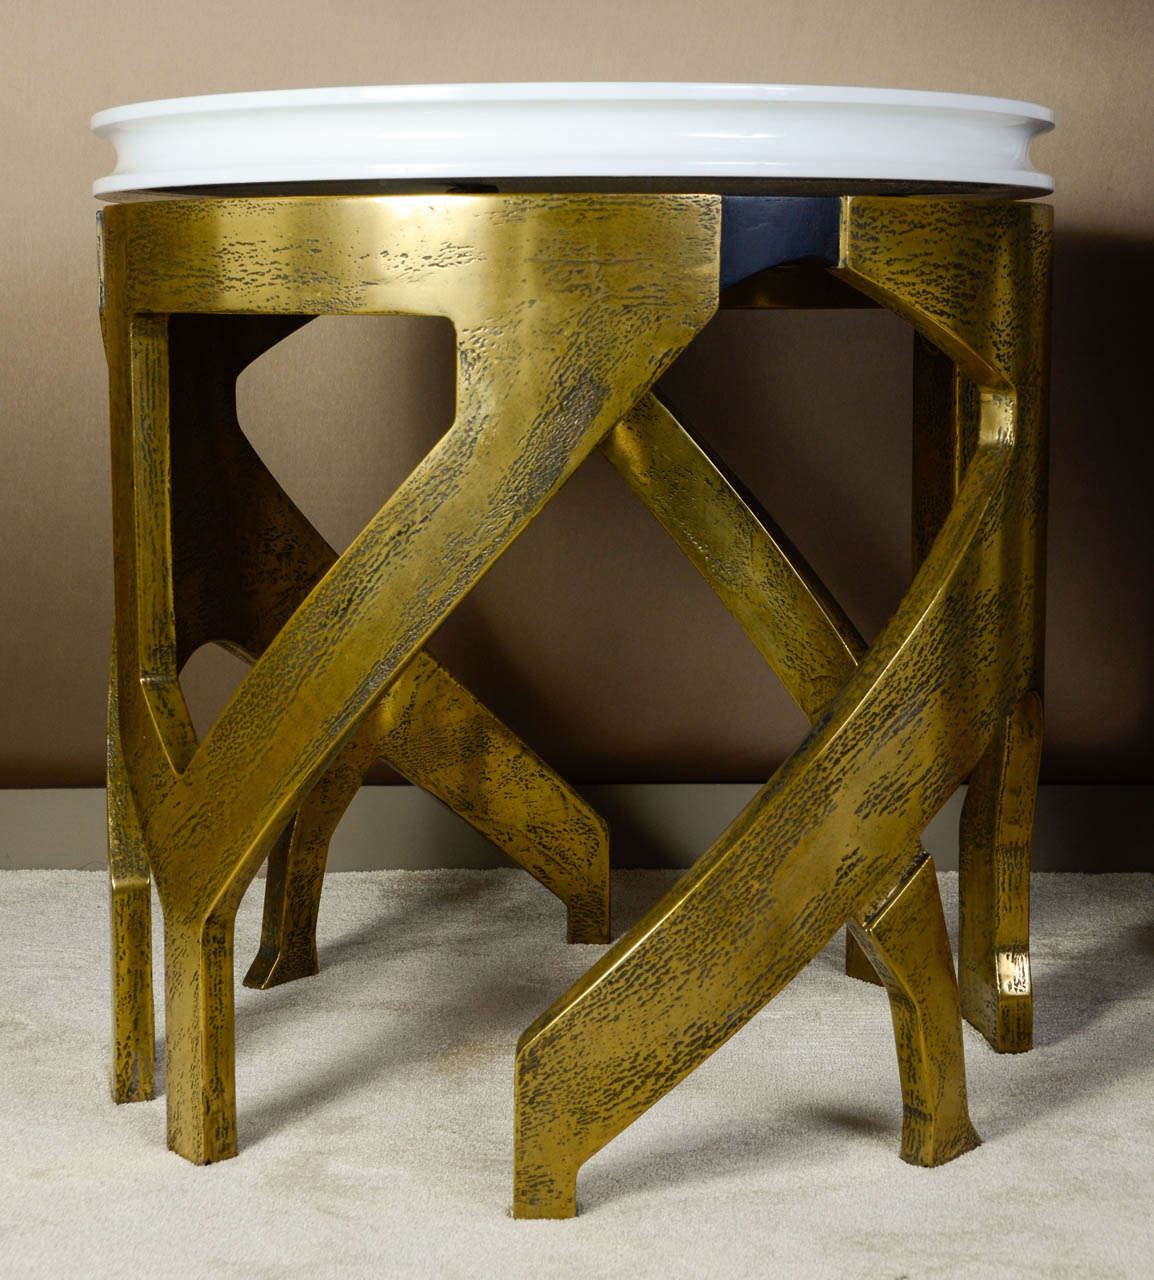 Lovely pedestal table by Charles Tassin.
Top in lacquered wood, base in metallized wood.
Color's top in choice according to the RAL color chart.
This pedestal is to order.
Manufacturing lead times is 6 to 8 weeks.